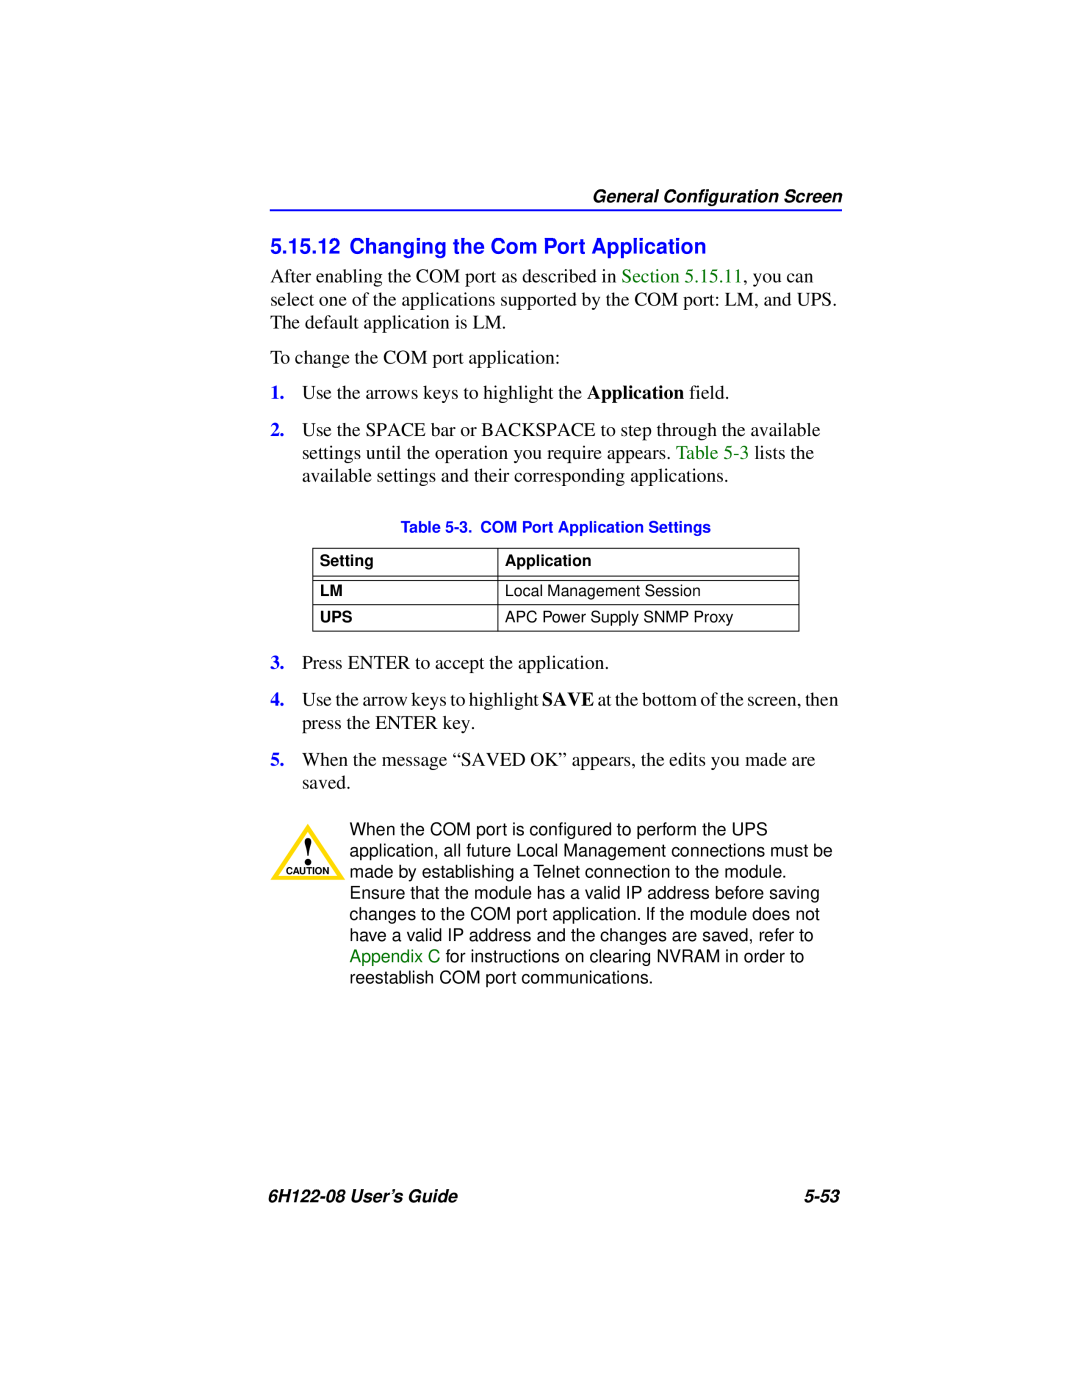 Cabletron Systems 6H122-08 manual Changing the Com Port Application 